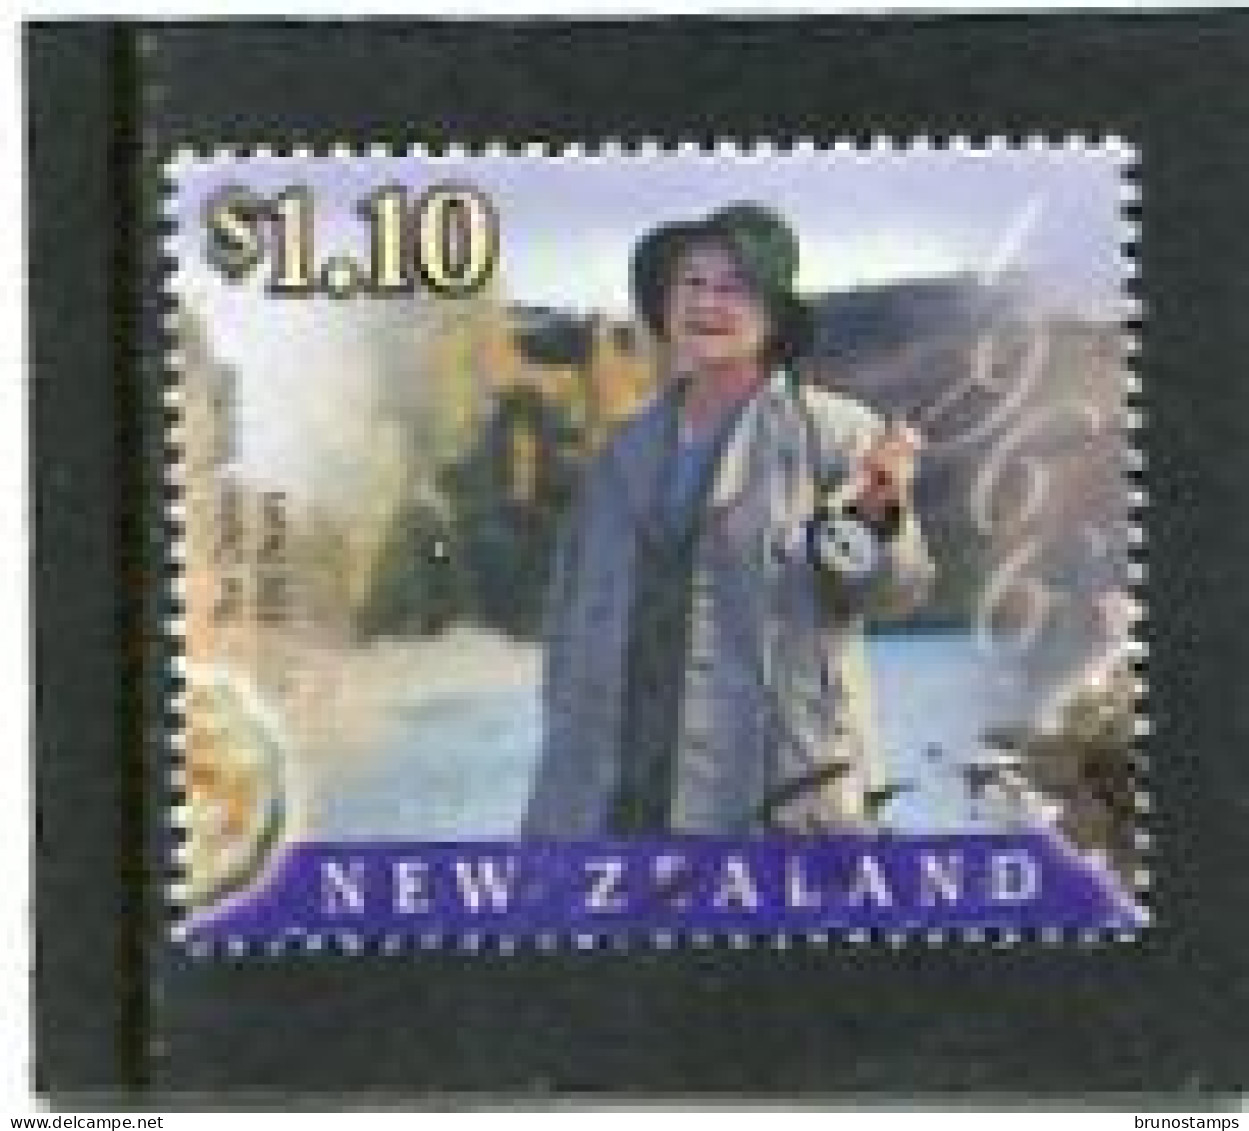 NEW ZEALAND - 2000  1.10$   QUEEN'S BIRTHDAY  FINE  USED - Used Stamps